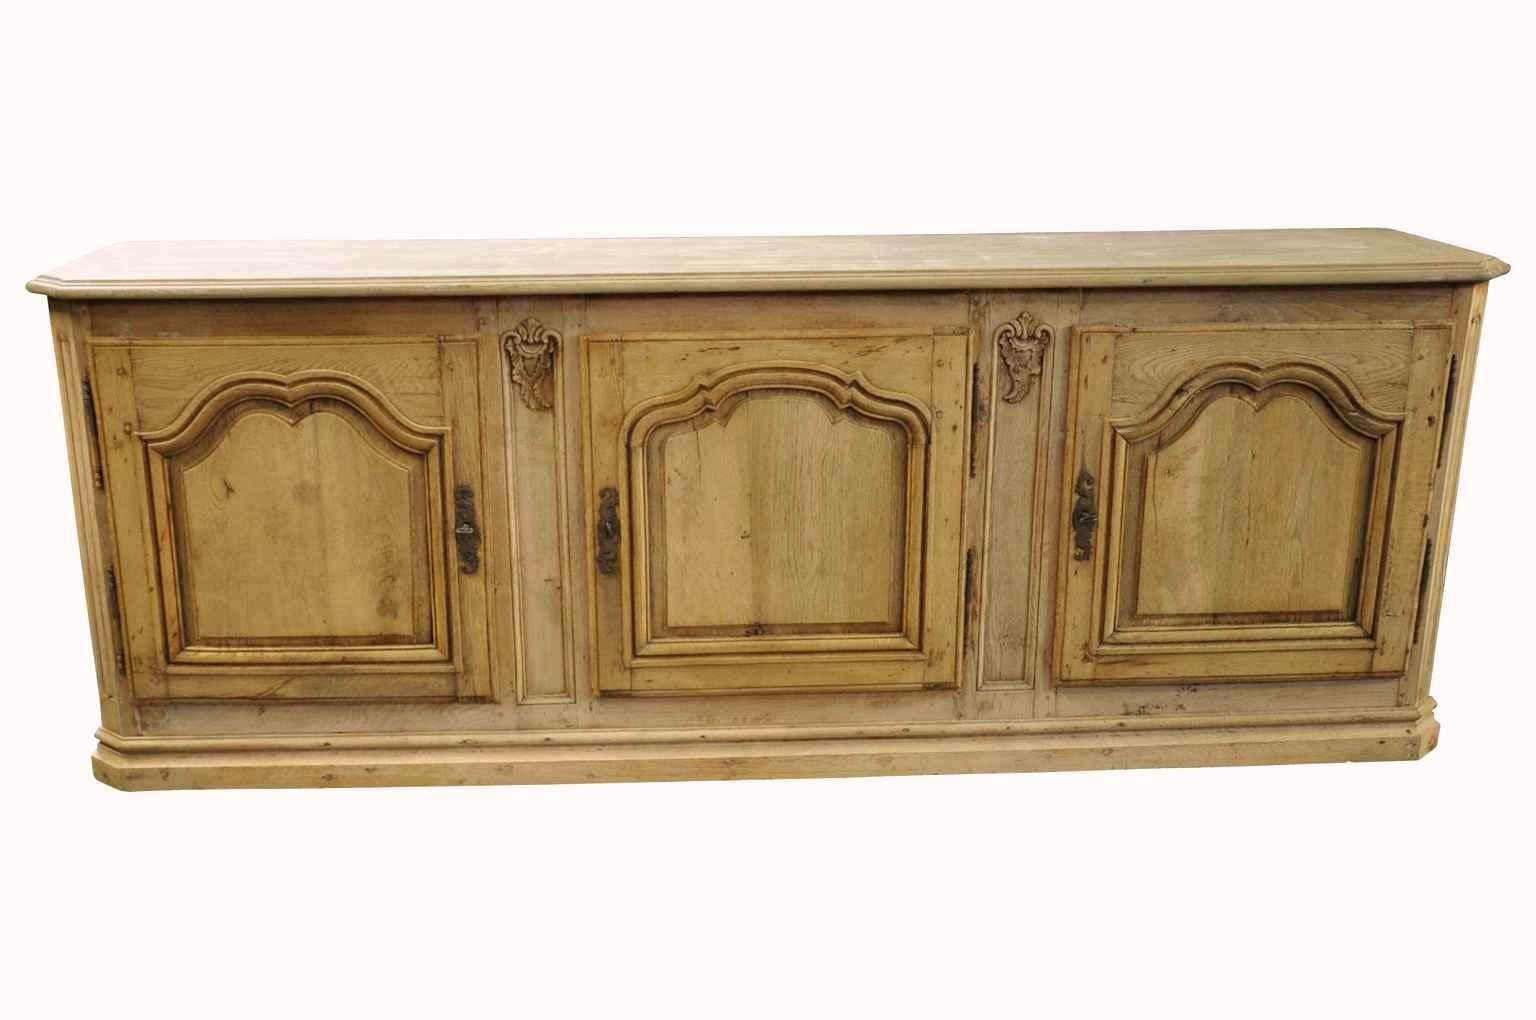 A very lovely later 18th century enfilade, buffet from the South of France. Soundly constructed from washed, bleached oak.